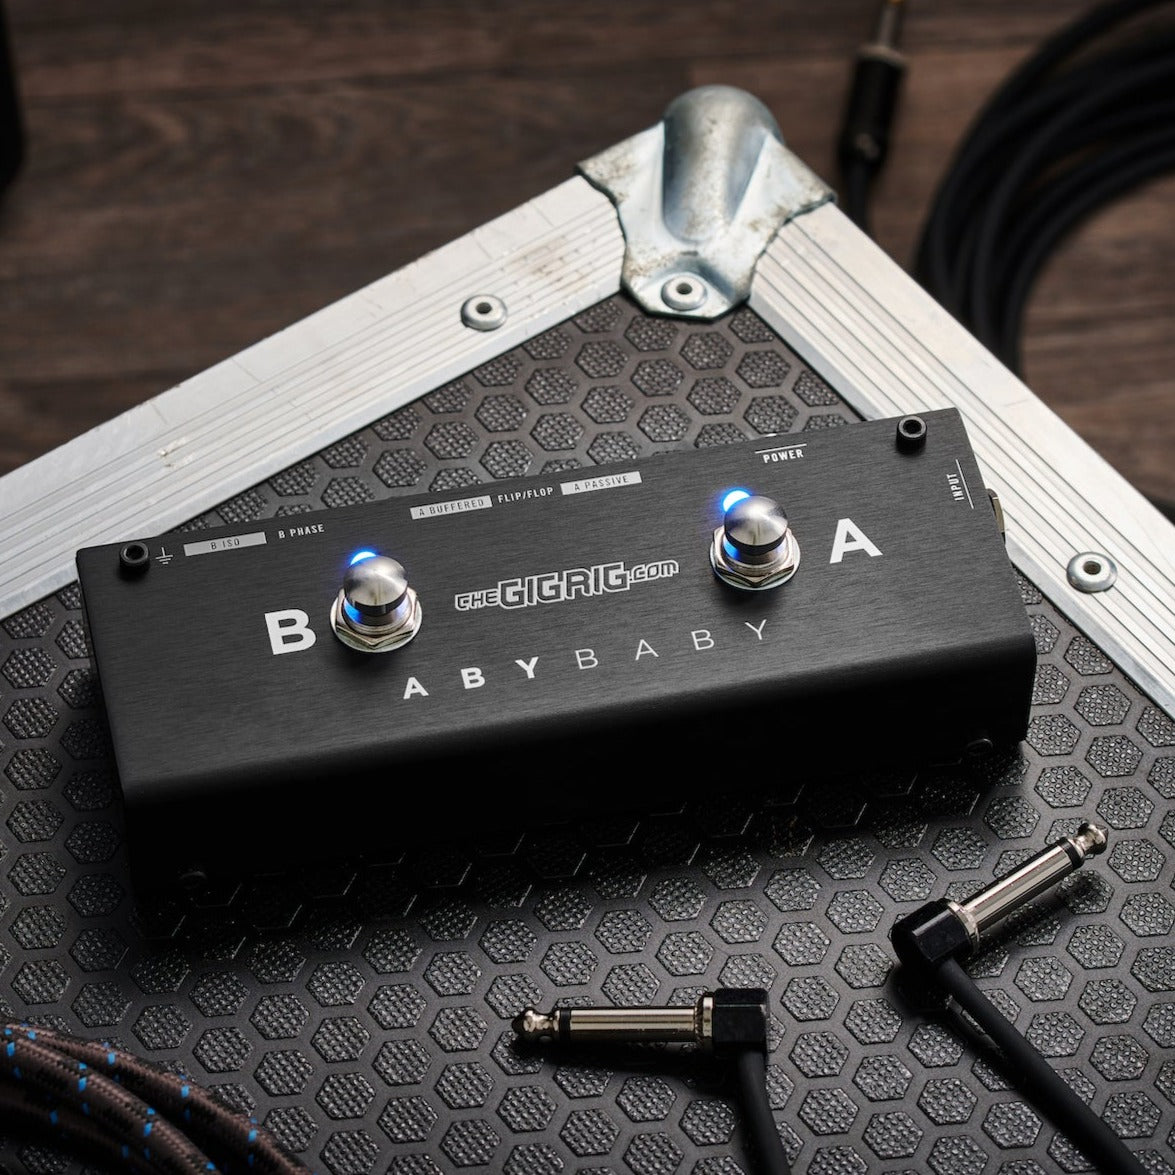 TheGigRig Aby Baby is the ultimate compact ABY signal switcher